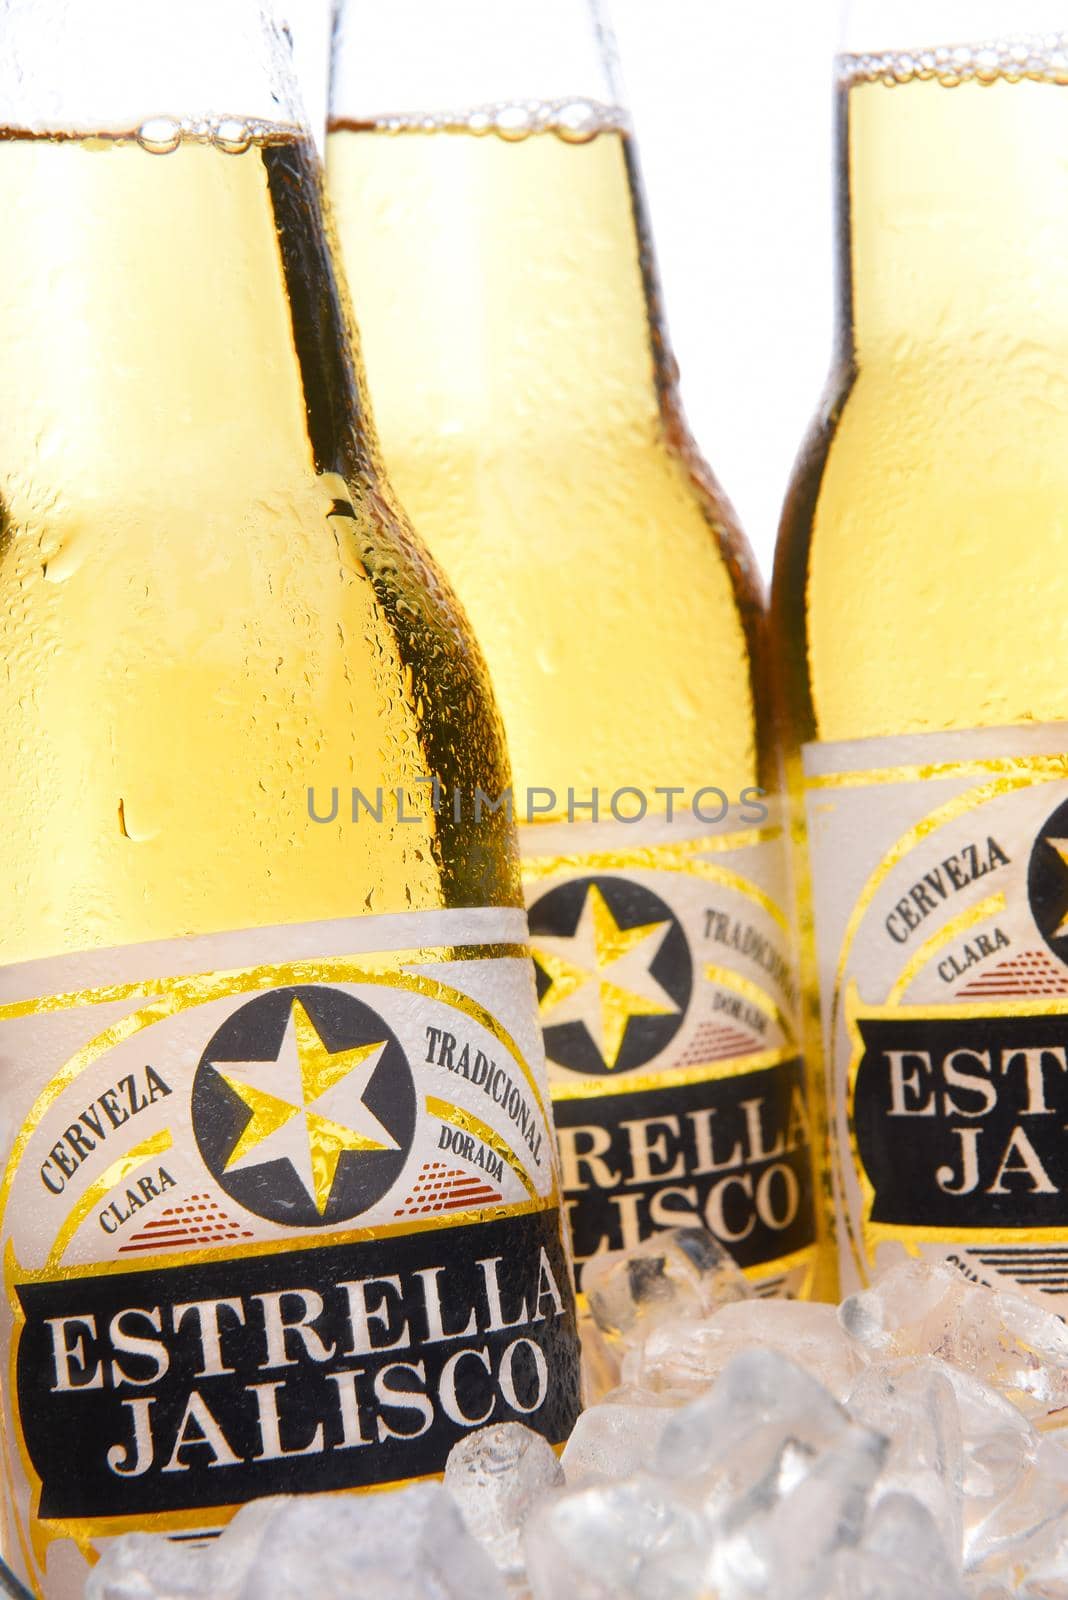 IRVINE, CALIFRONIA - MARCH 29, 2018: Closeup of three bottles of Estrella Jalisco beer in ice.  Estrella Jalisco is a American Lager style beer brewed by Grupo Modelo.